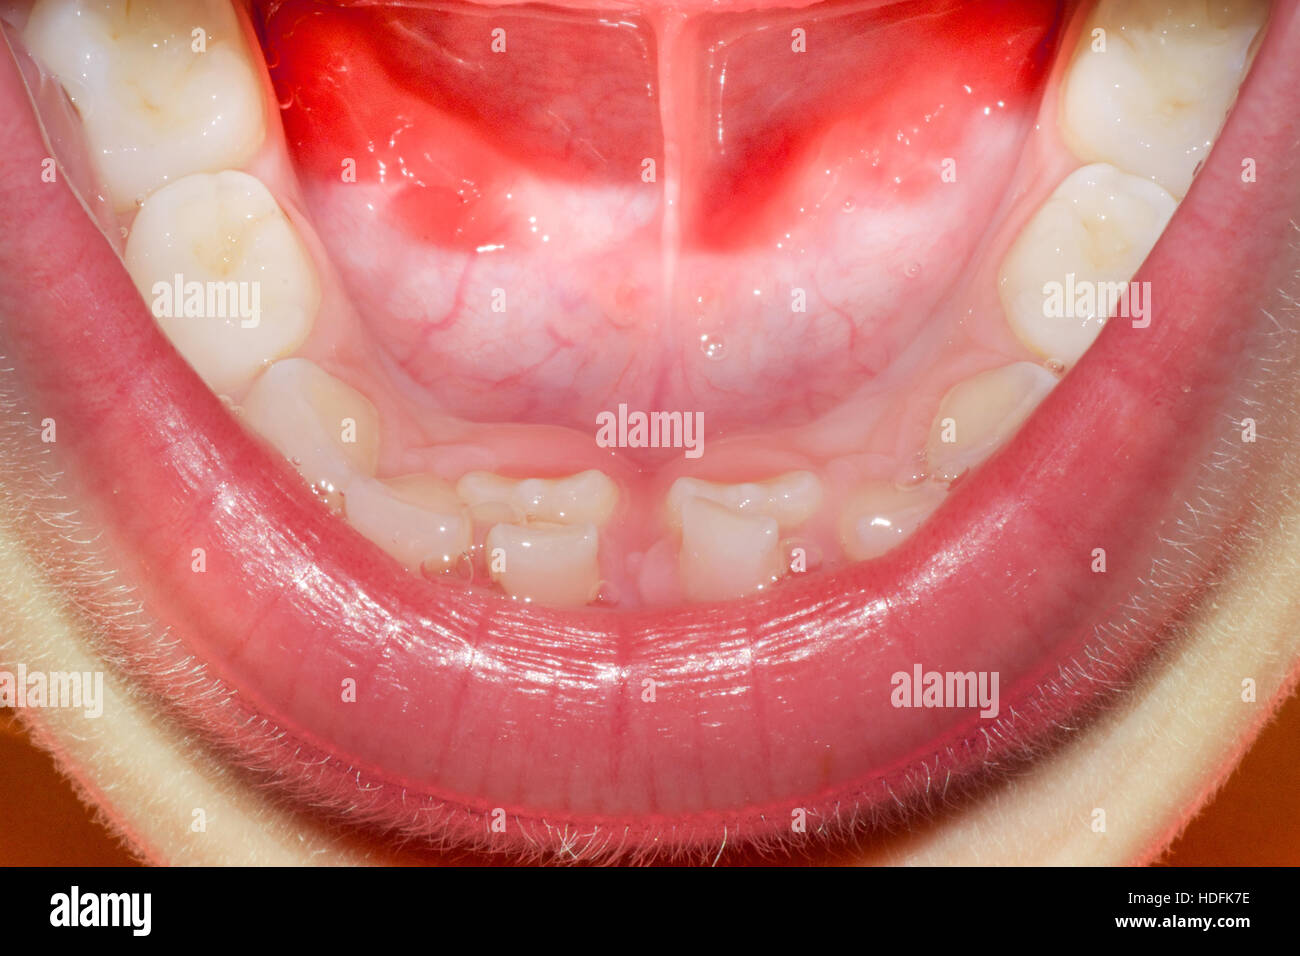 child's mouth with baby teeth and grown up teeth both on bottom incisors this is known as shark teeth Stock Photo